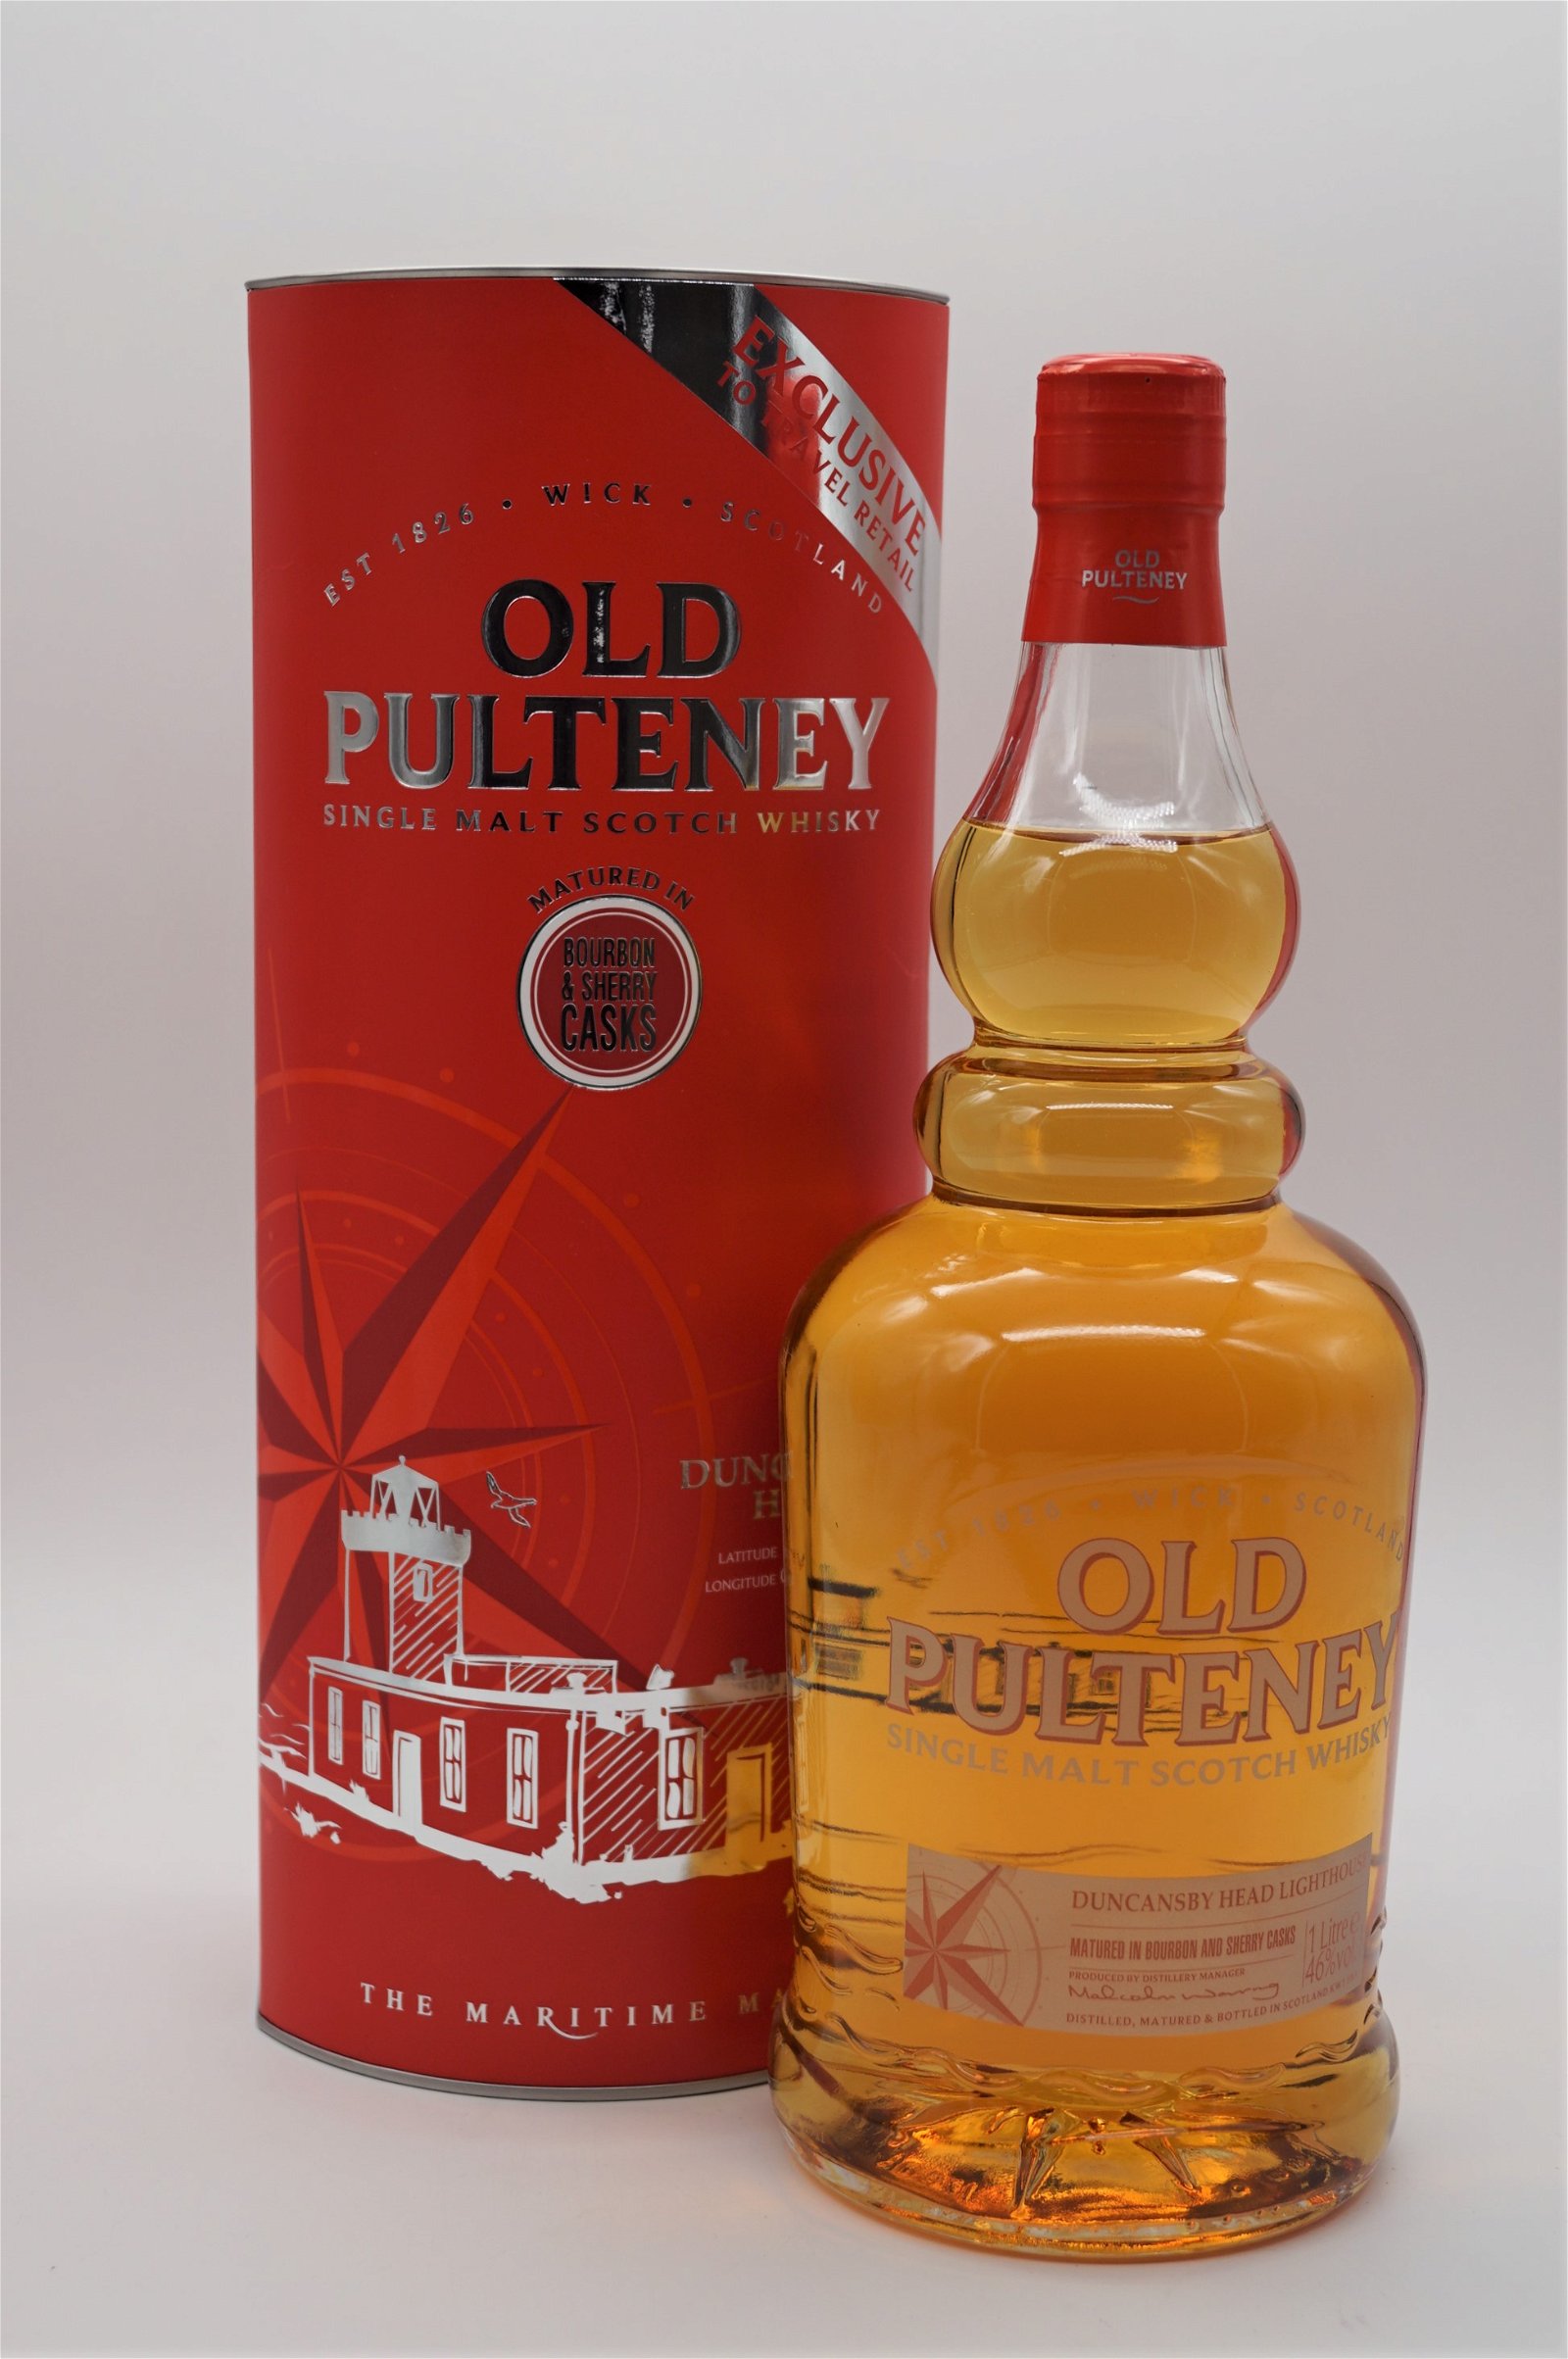 Old Pulteney Duncansby Head Bourbon and Sherry Cask Single Malt Scotch Whisky